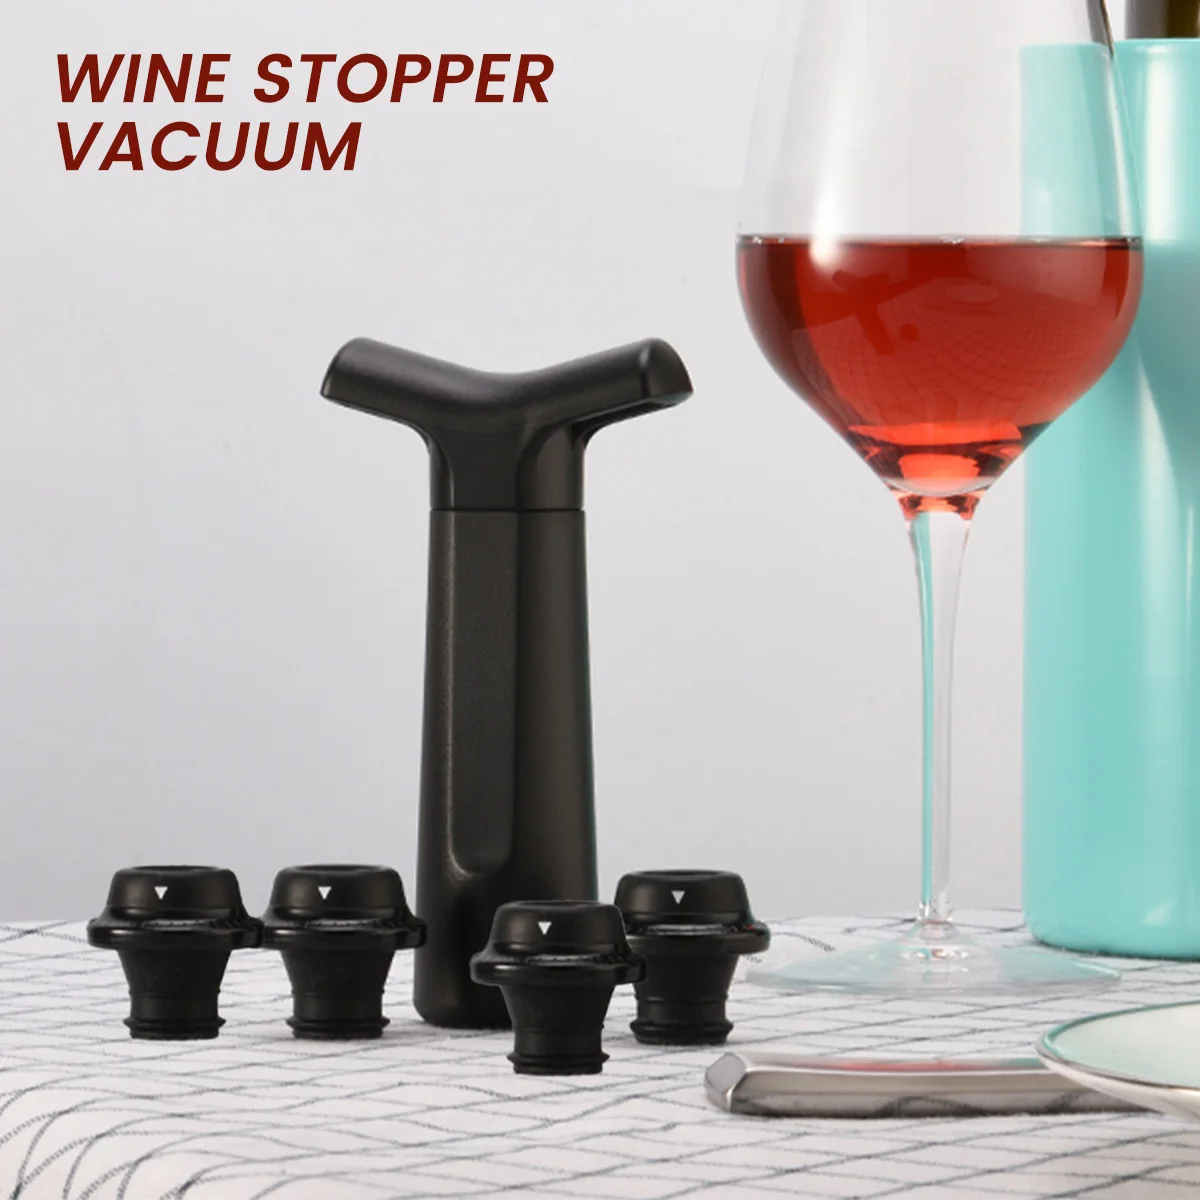 

Wine Saver 1 Vacuum Pump with 4 Vacuum Wine Stopper Wine Preserver with Time Scale Reusable Leakproof Wine Saver Wine Corks to